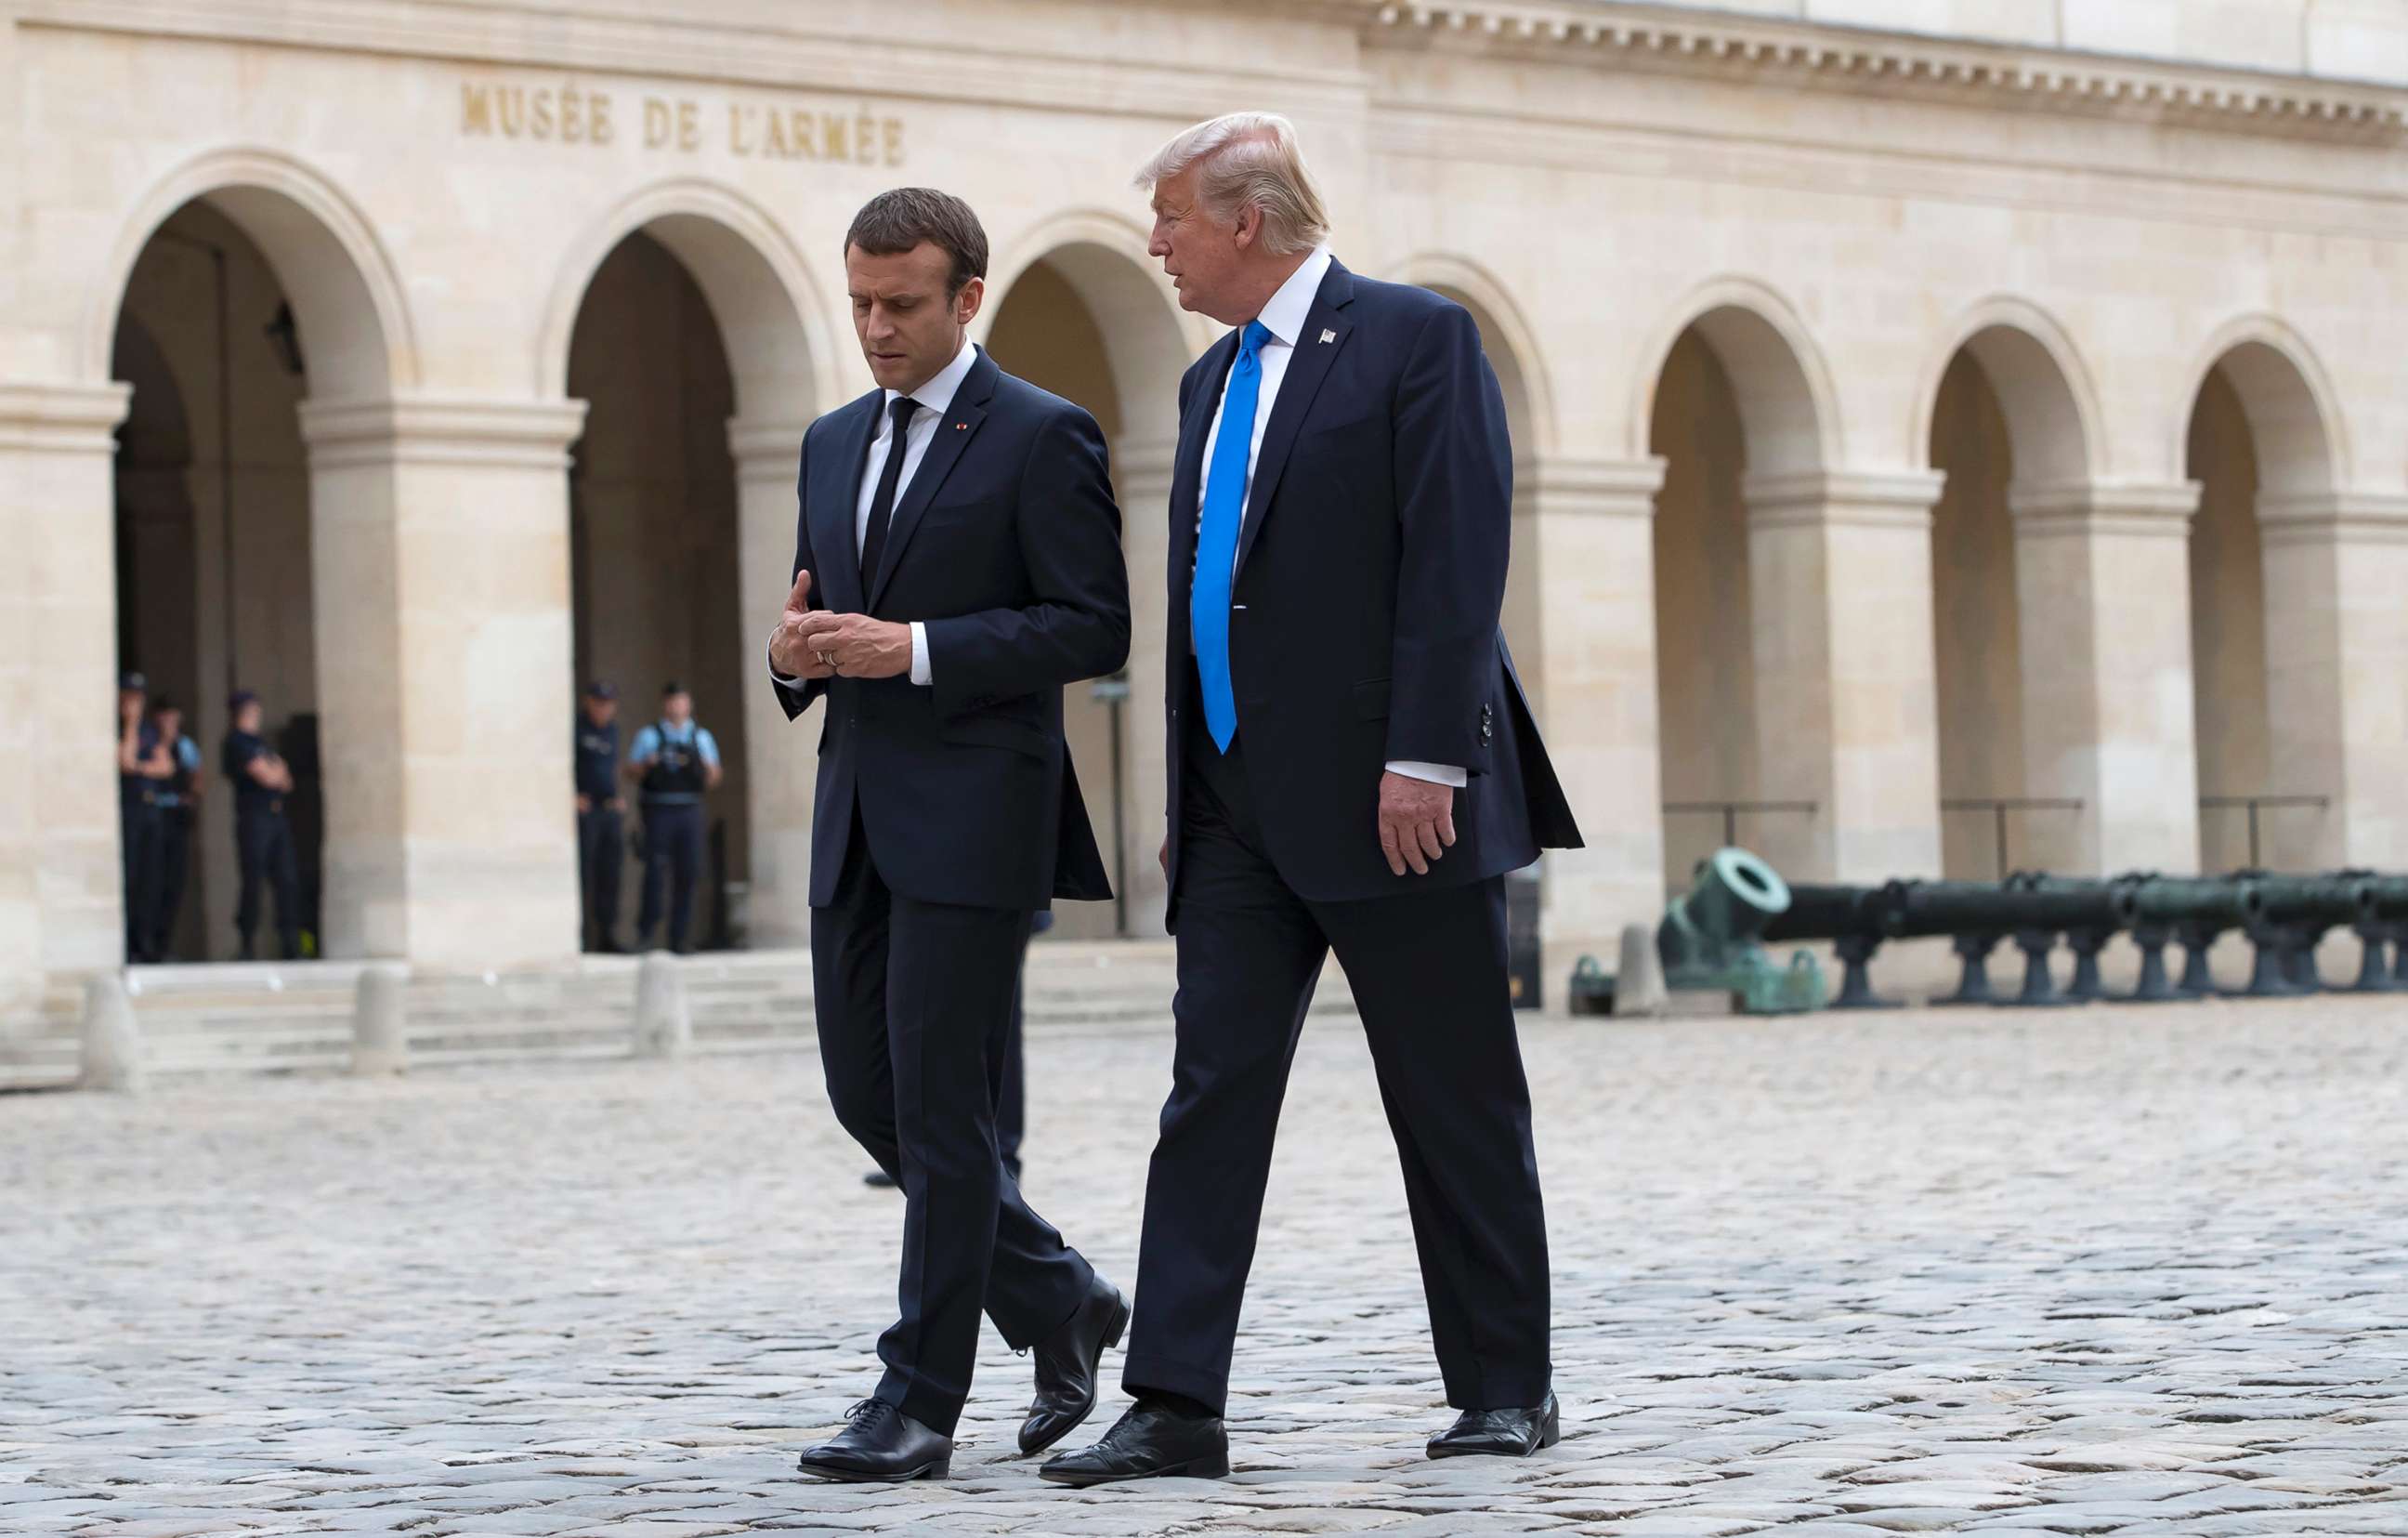 PHOTO: French President Emmanuel Macron walks with President Donald J. Trump as they leave Les Invalides museum in Paris, July 13, 2017. 